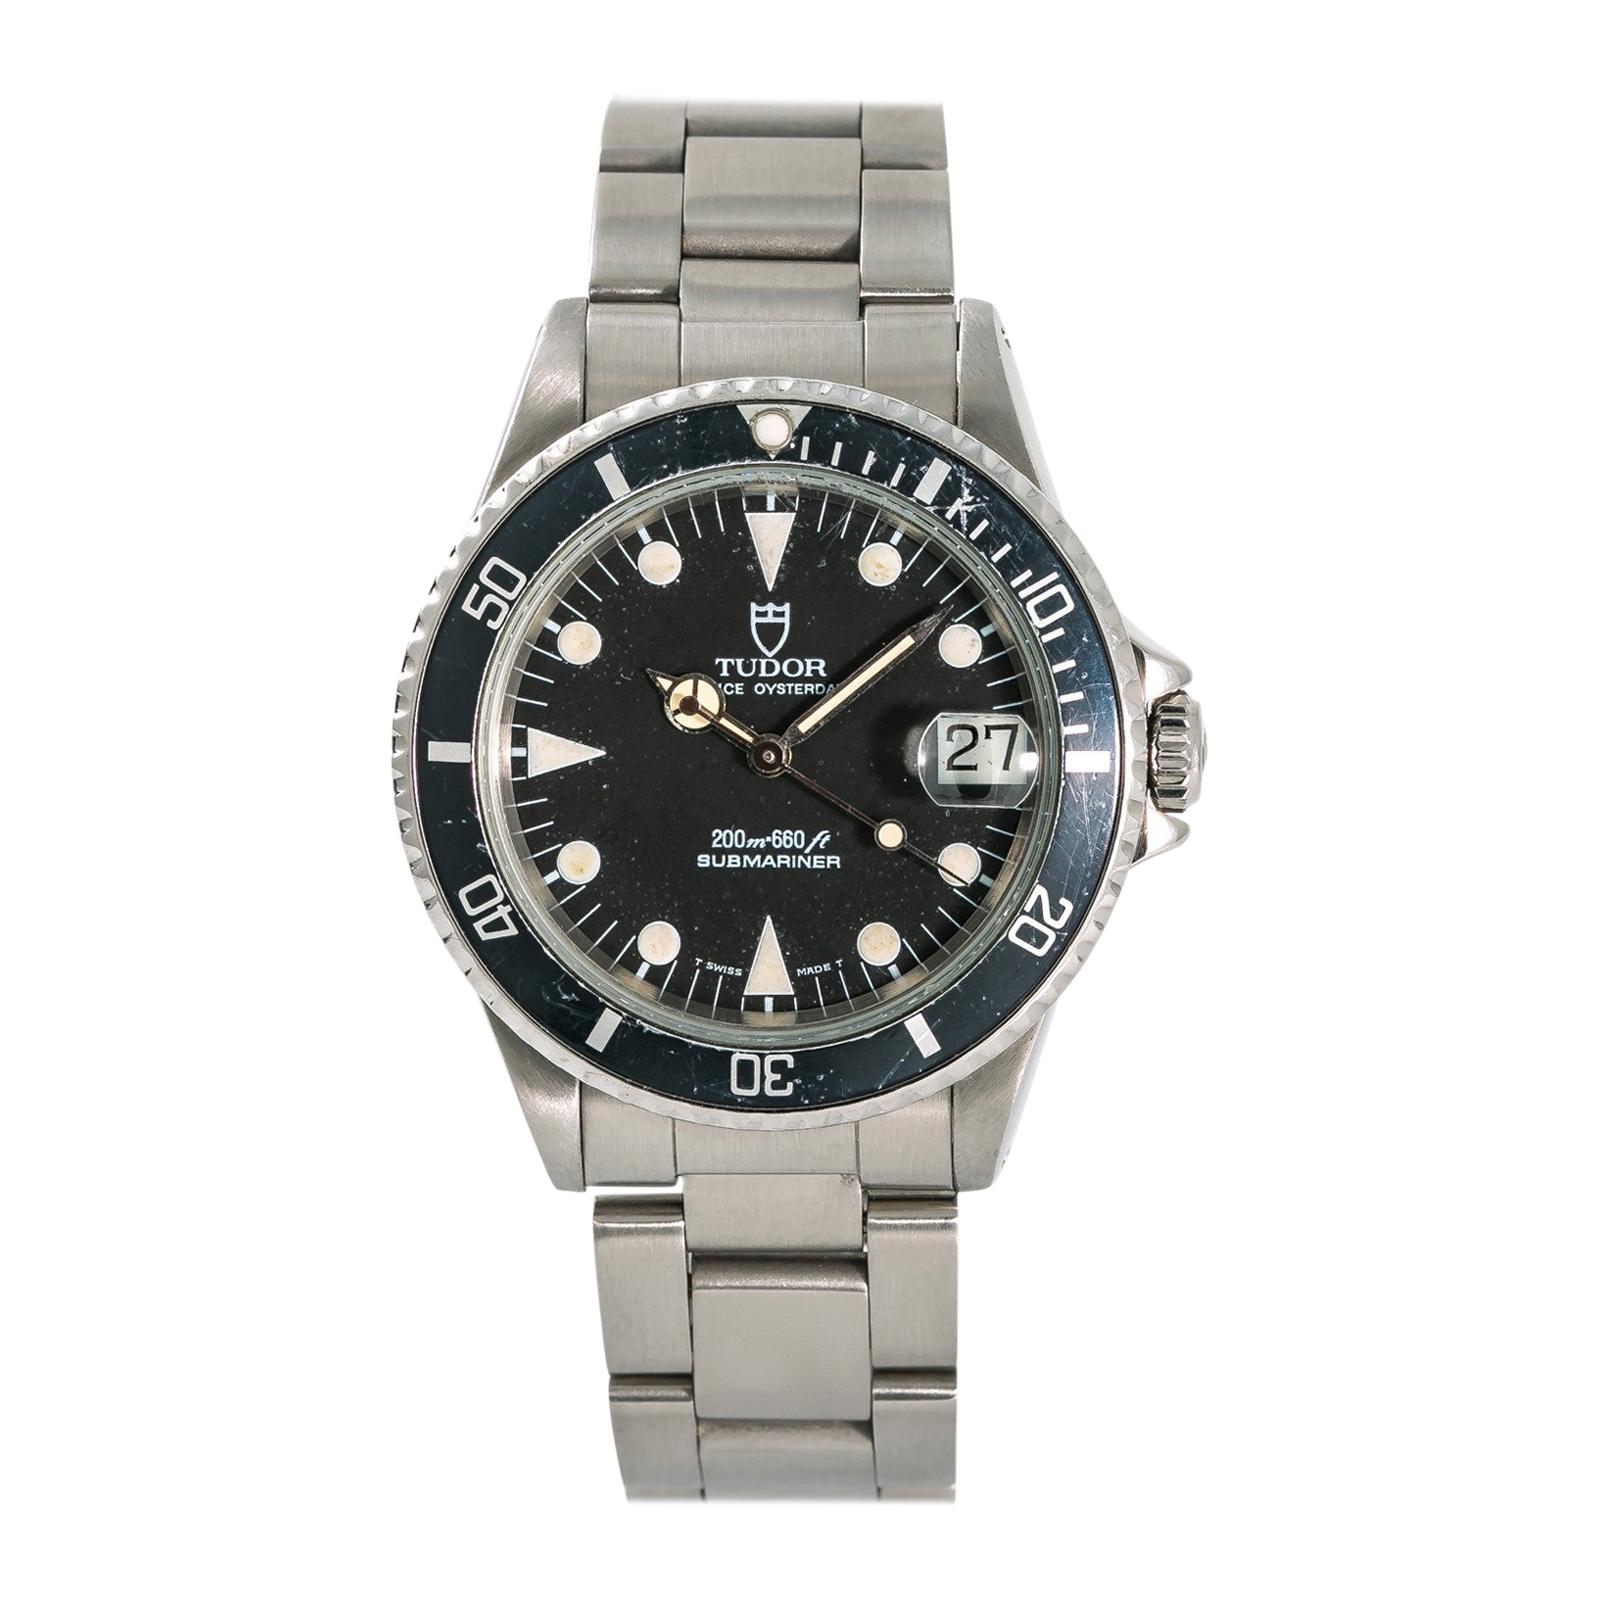 Tudor Submariner 75090, Black Dial, Certified and Warranty